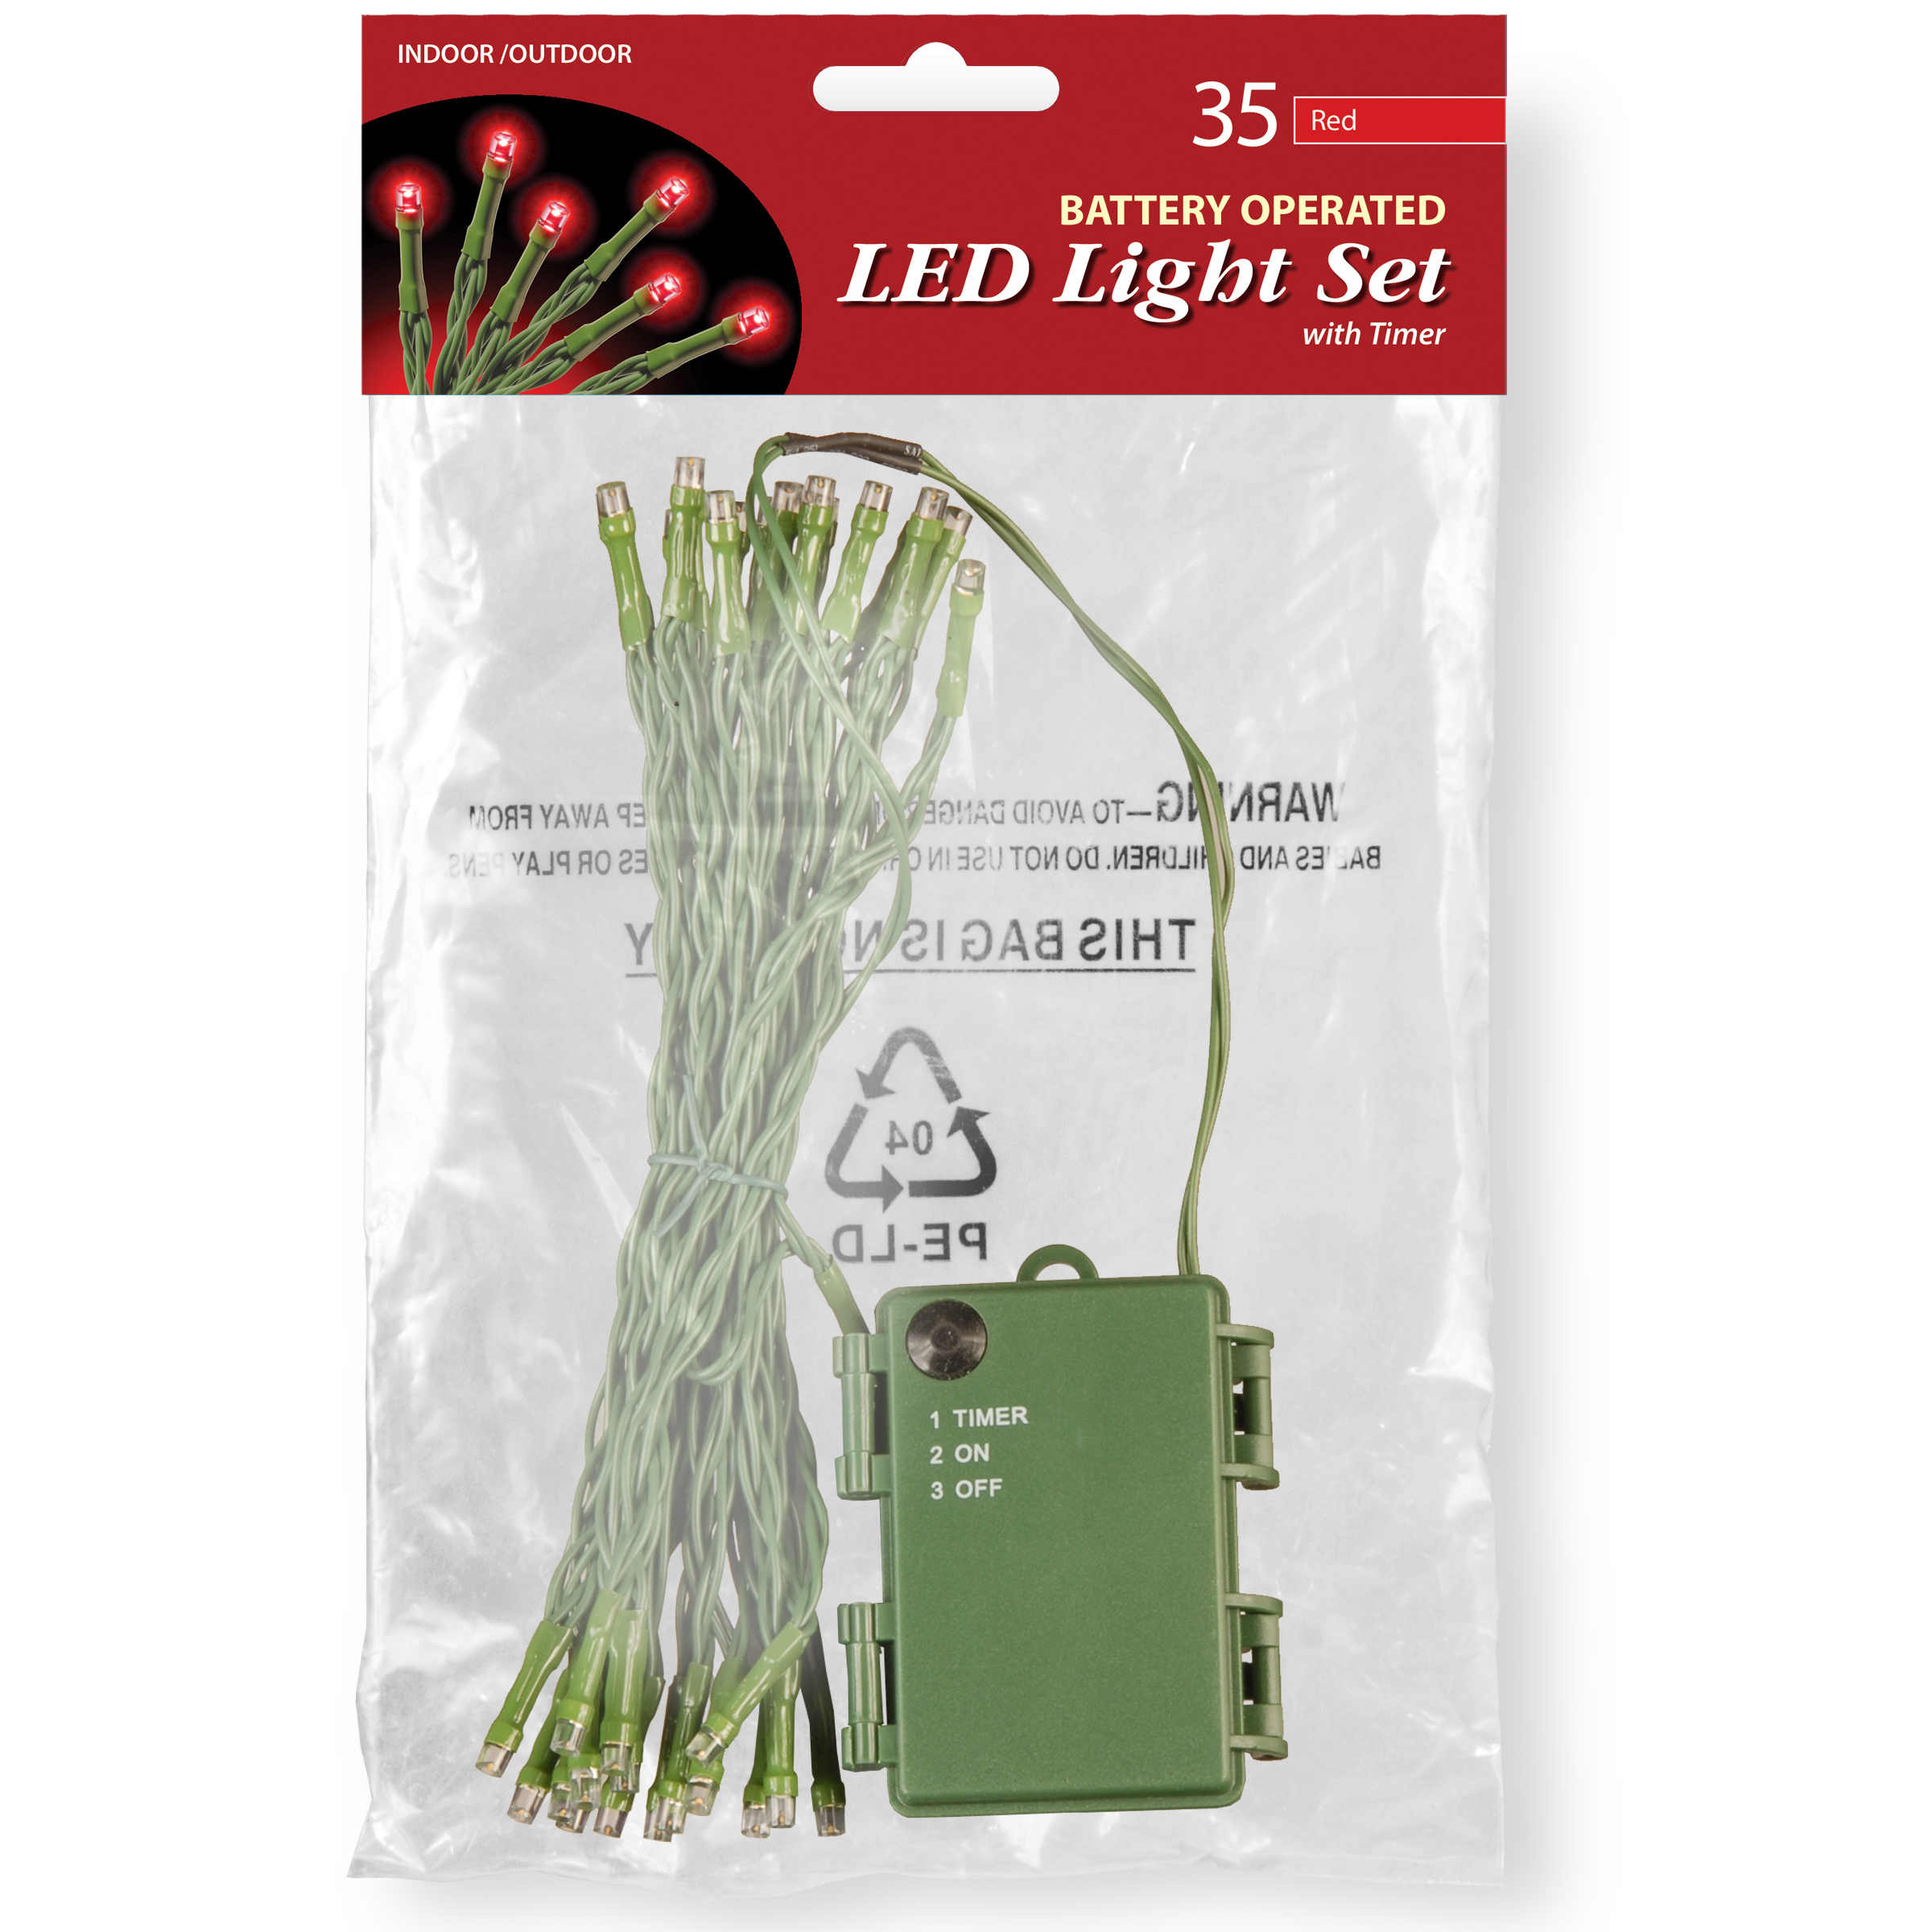 Battery Operated LED Light String Set, 35 Bulb, Red - image 1 of 3